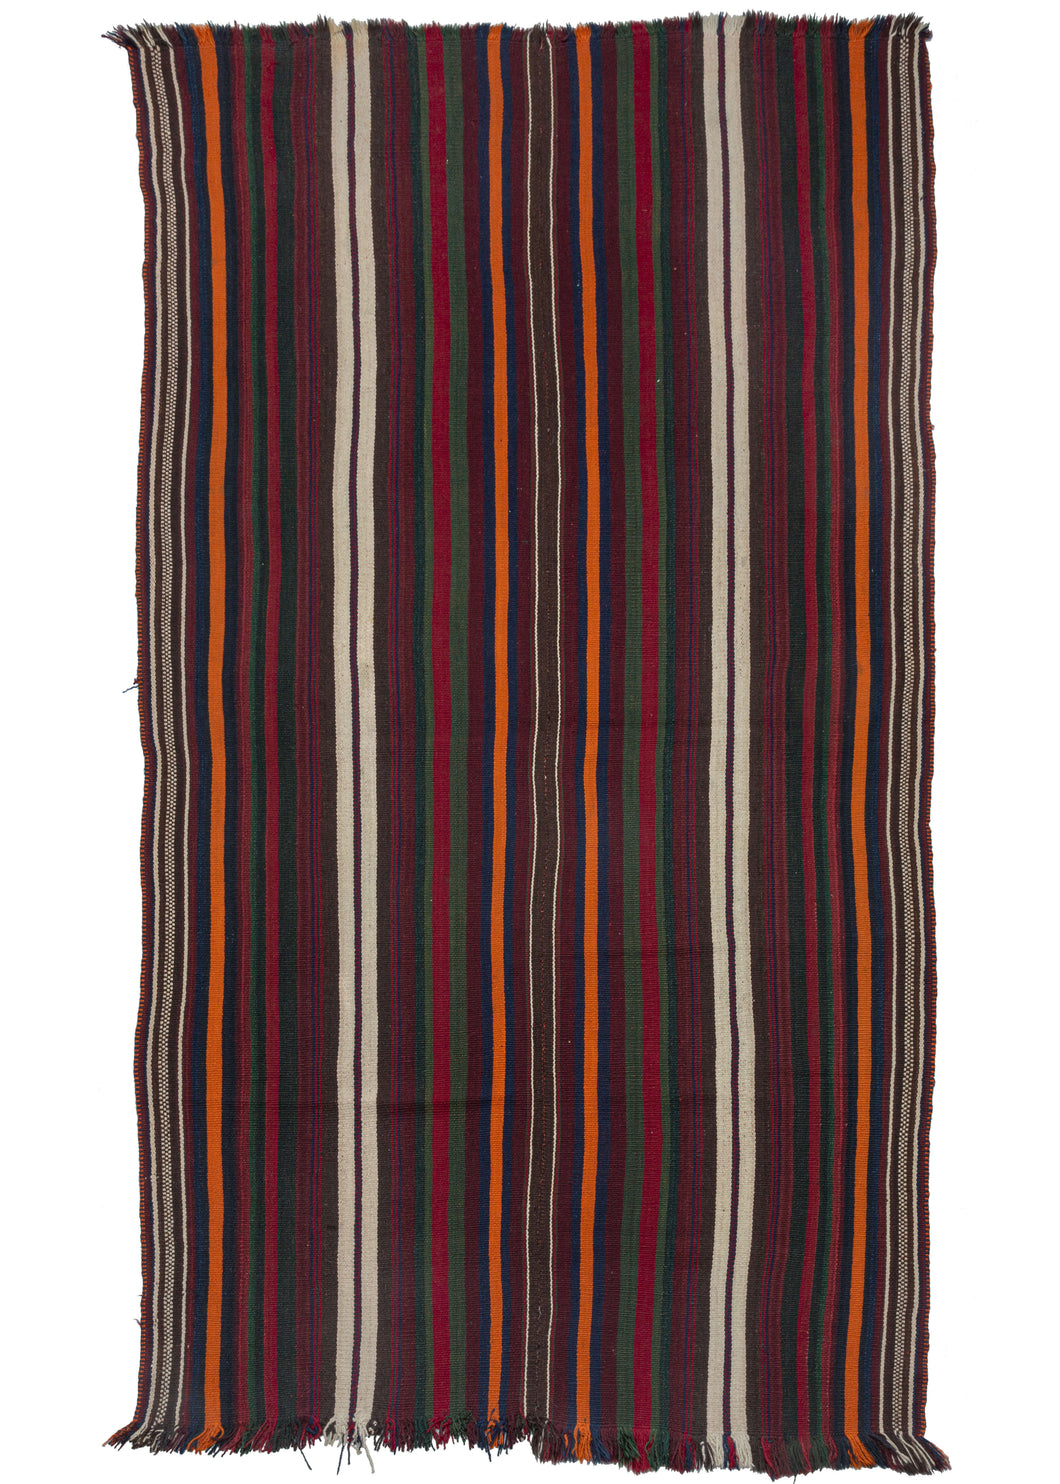 Qashqa'i warp facing kilim featuring simple yet striking stripes along the length of the runner in orange, green, blue and prominent shades of red and maroon. Symmetrical in its patterning, two bold double white stripes pop on either side.